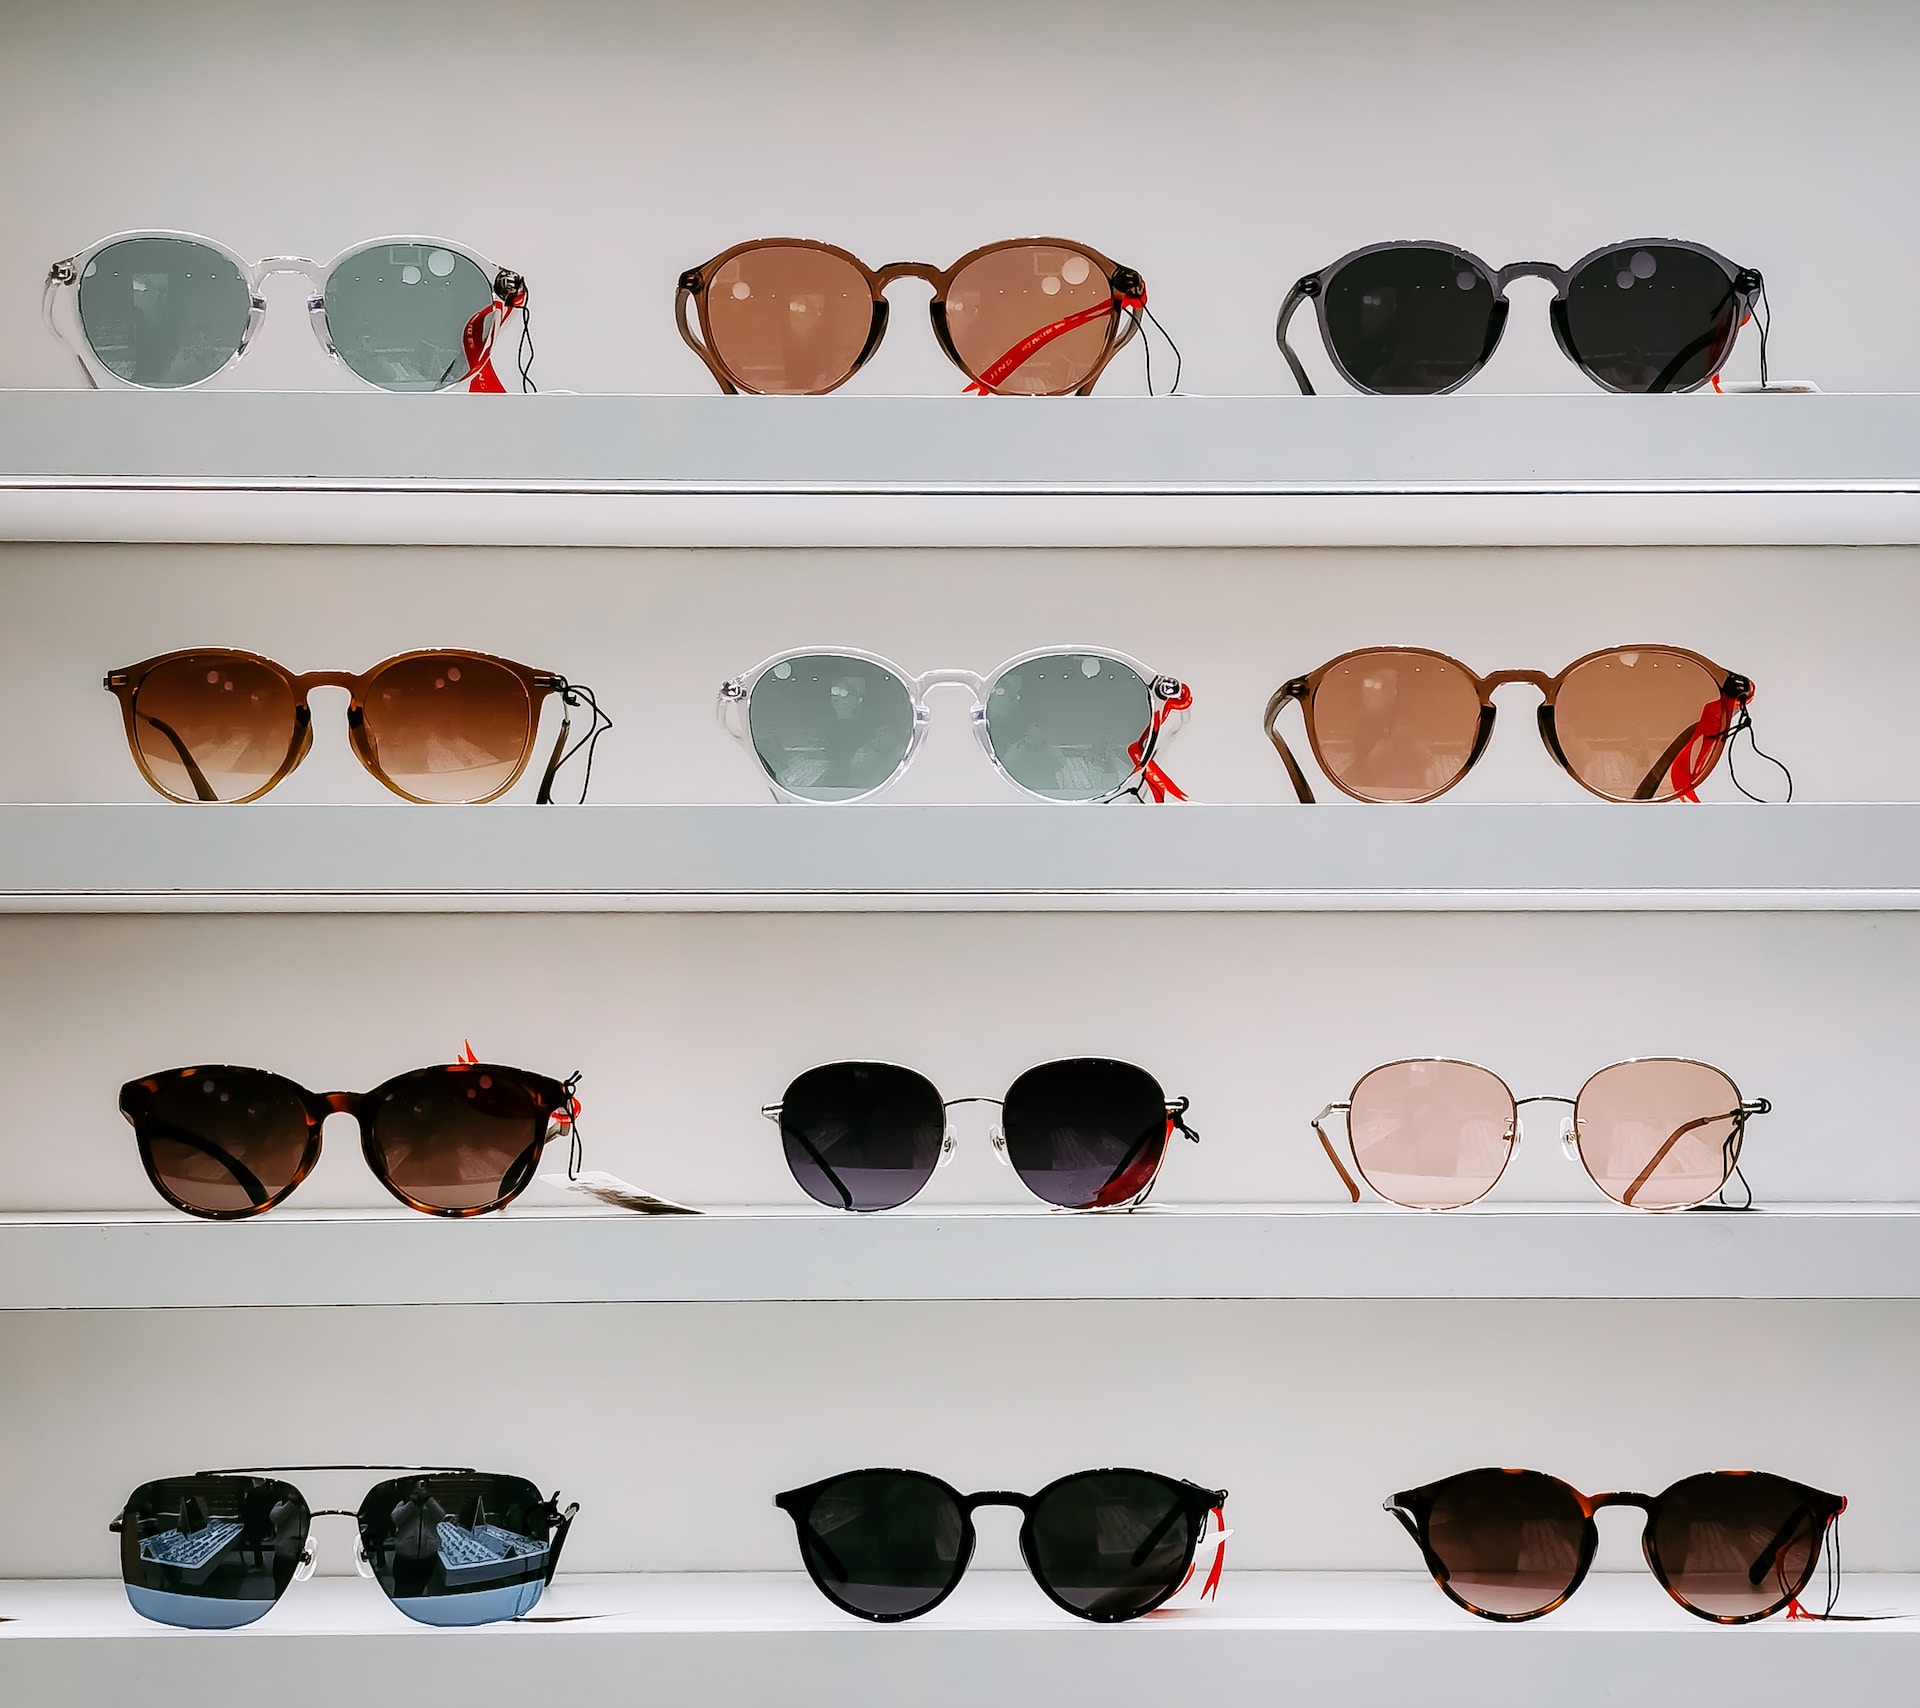 Sunglasses: A Scientific And Technical Perspective On The Lenses That Shield Your Eyes